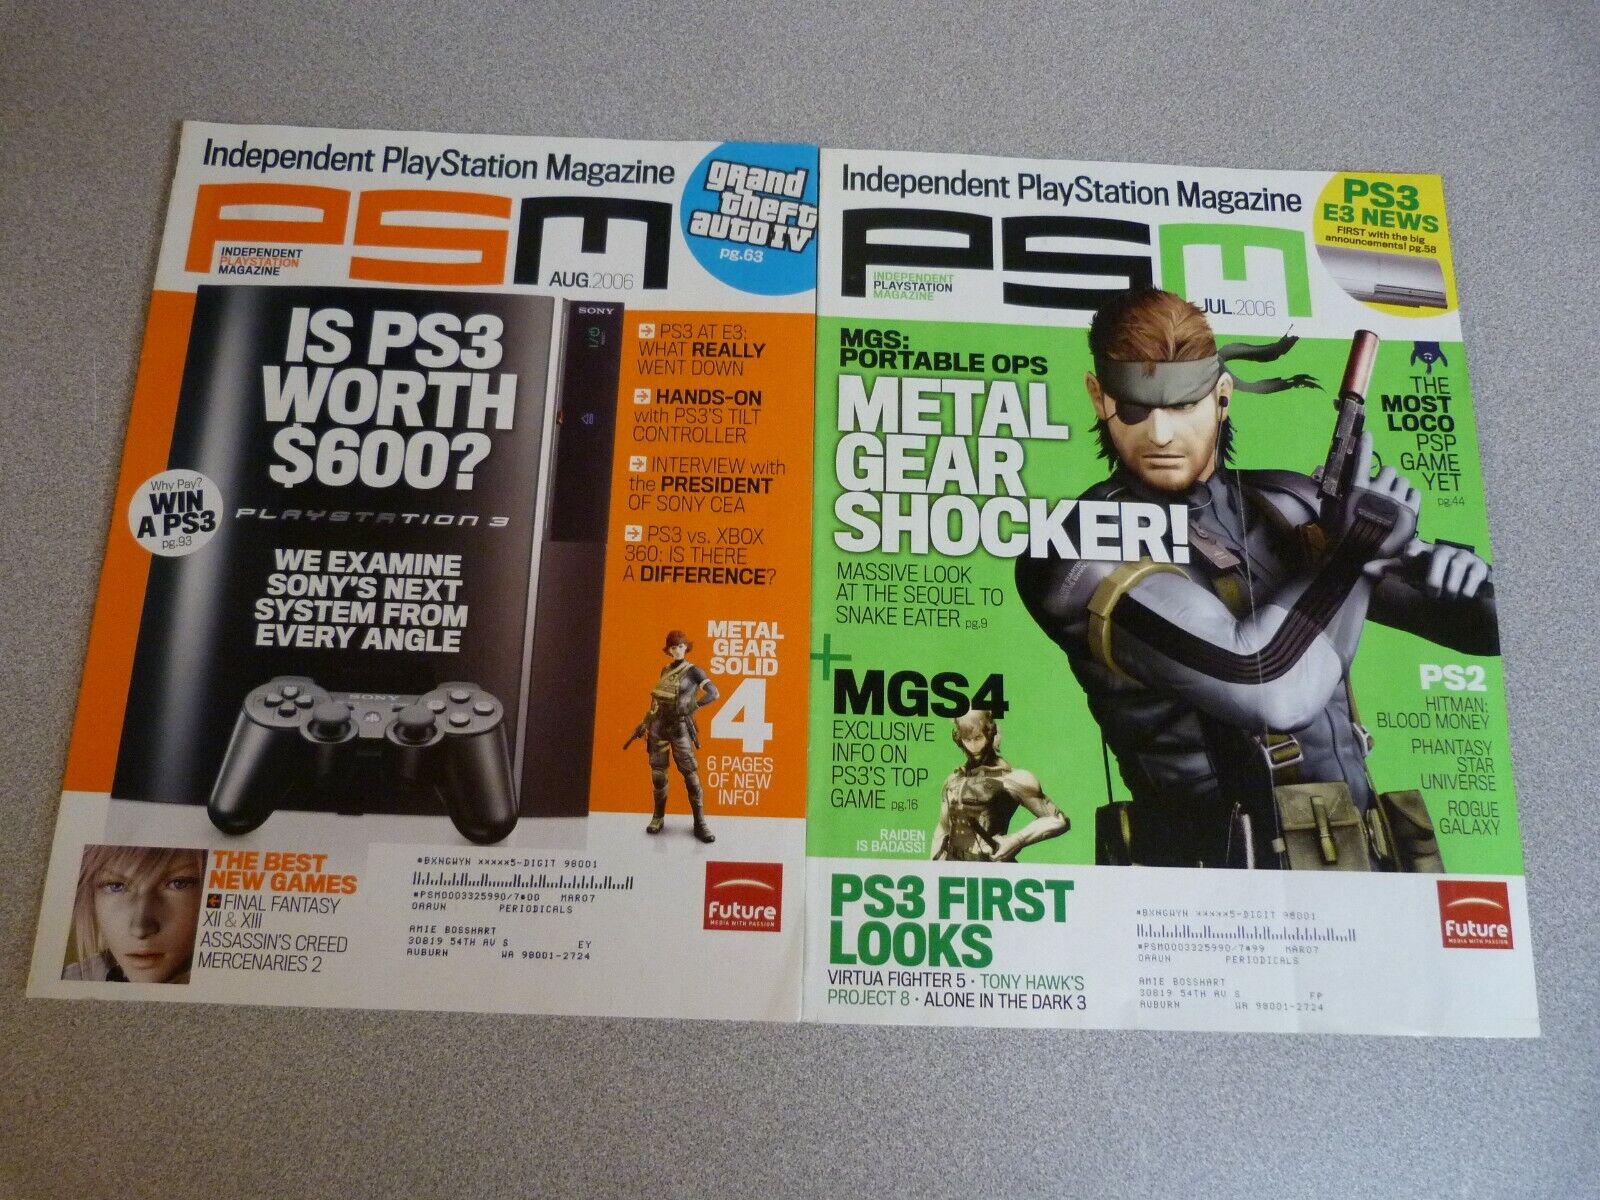 LOT Of 2 PSM PLAYSTATION MAGAZINES STRATEGY CHEATS & GUIDES 2006 ISSUES  PSM